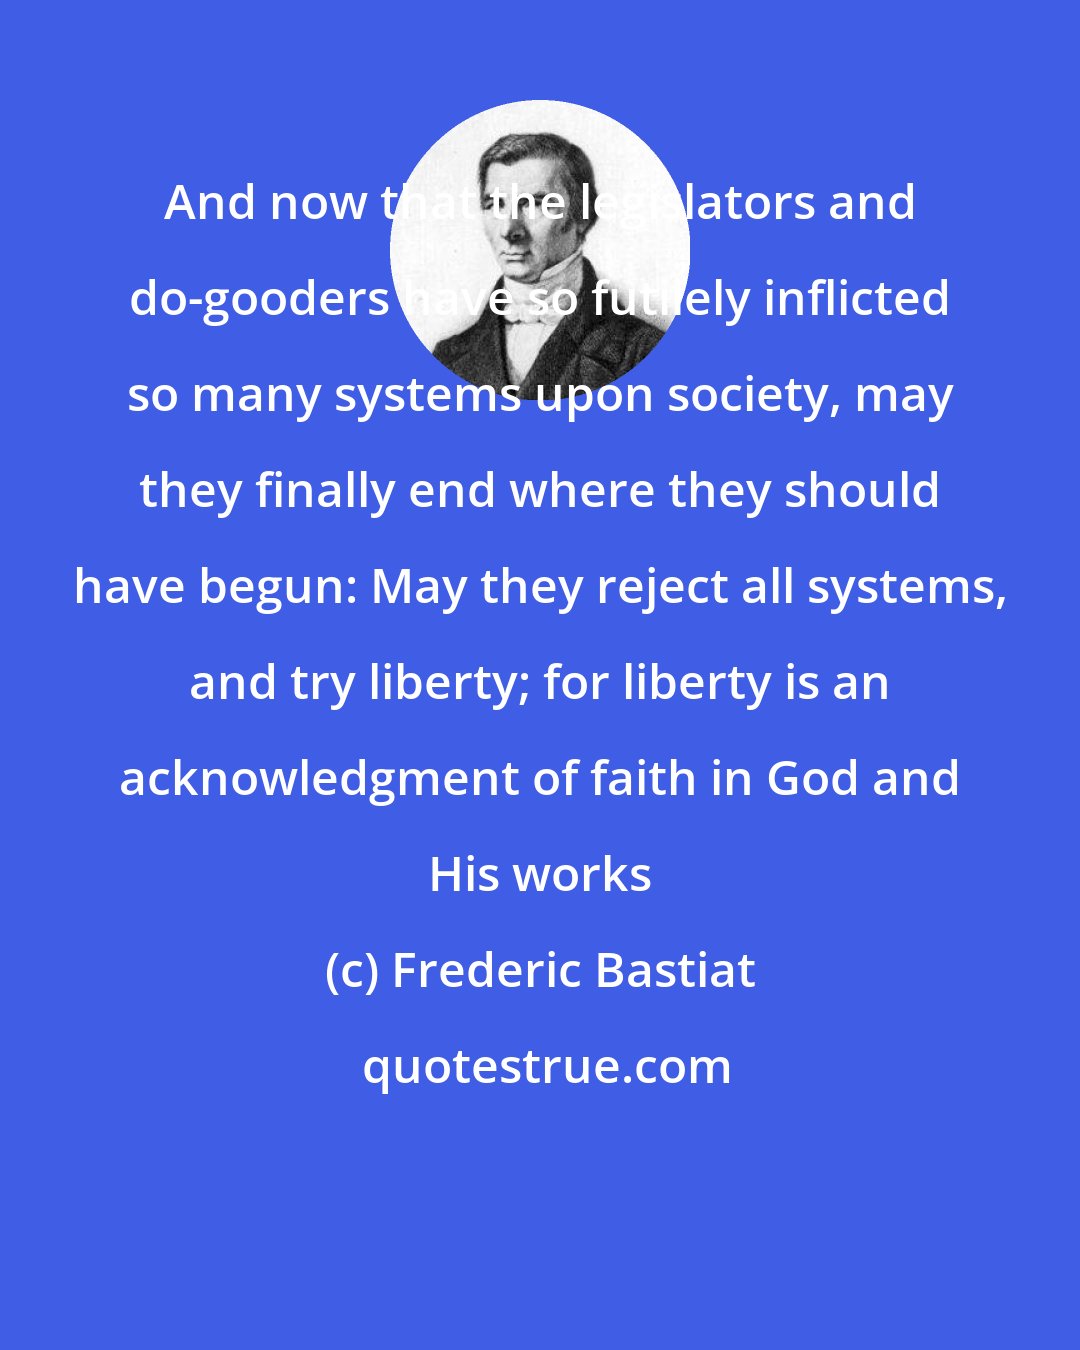 Frederic Bastiat: And now that the legislators and do-gooders have so futilely inflicted so many systems upon society, may they finally end where they should have begun: May they reject all systems, and try liberty; for liberty is an acknowledgment of faith in God and His works